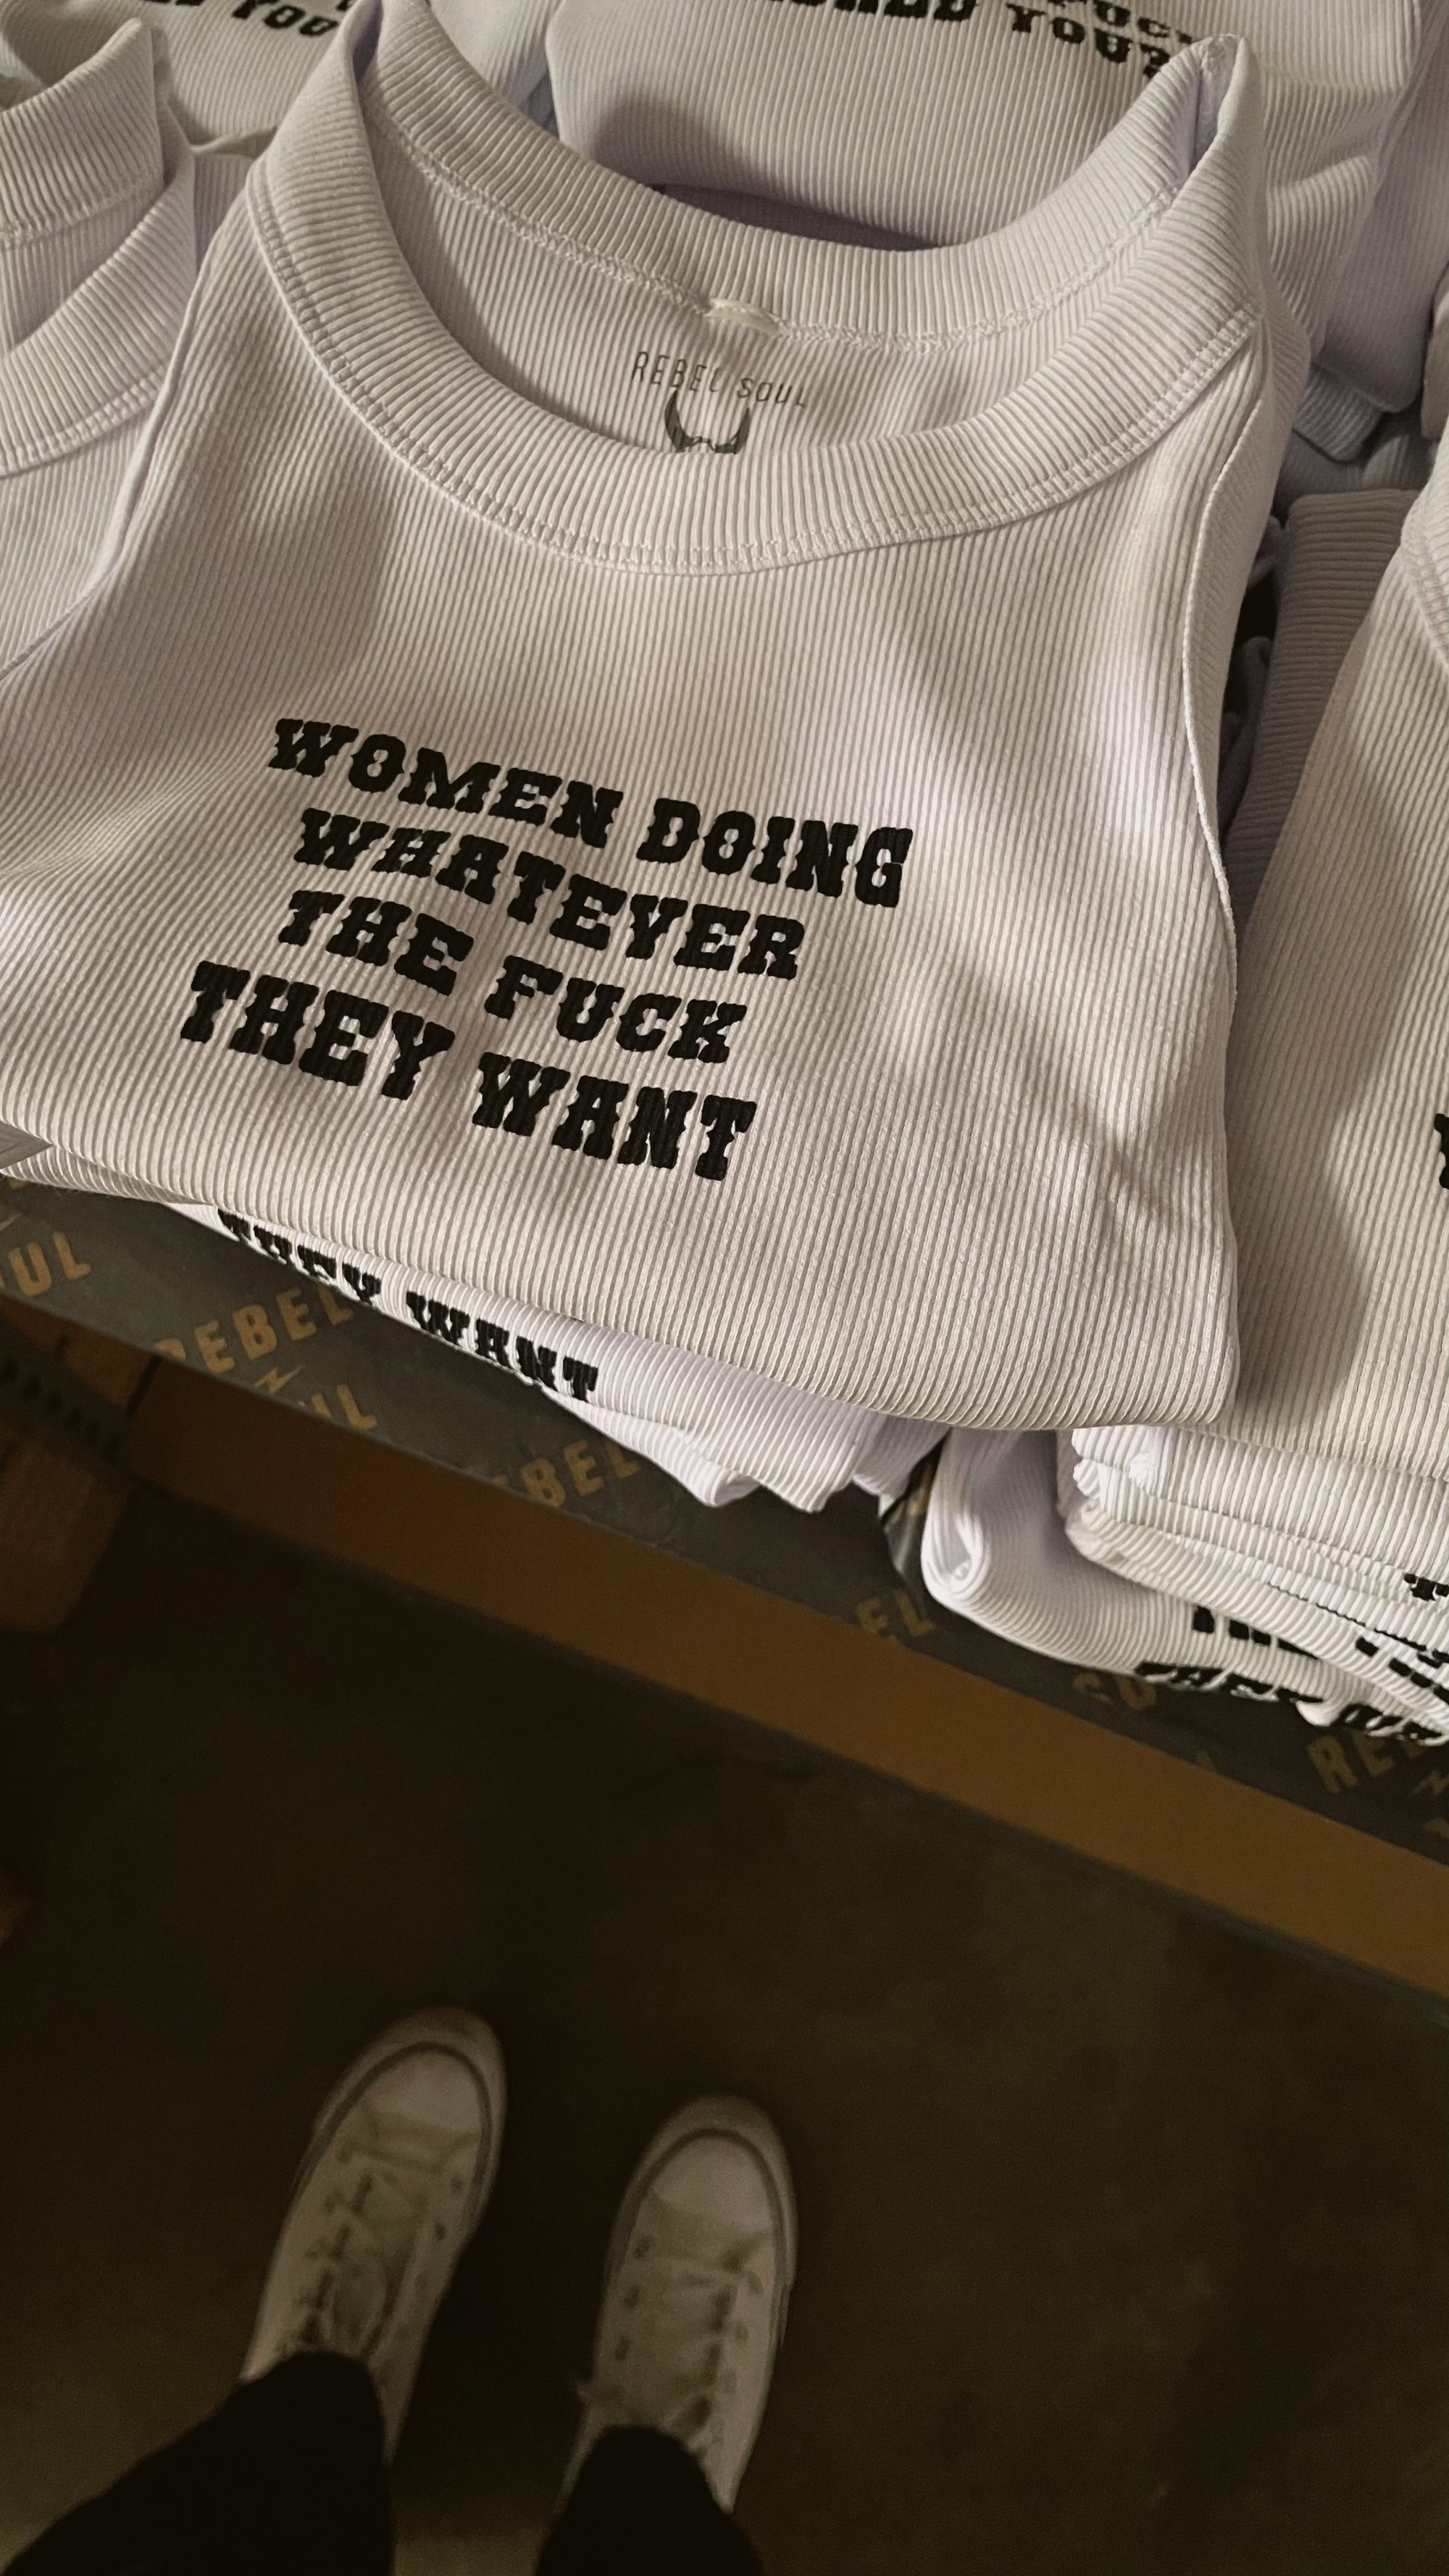 Women Doing What They Want Ribbed Tank - PREORDER SHIPS 05.23